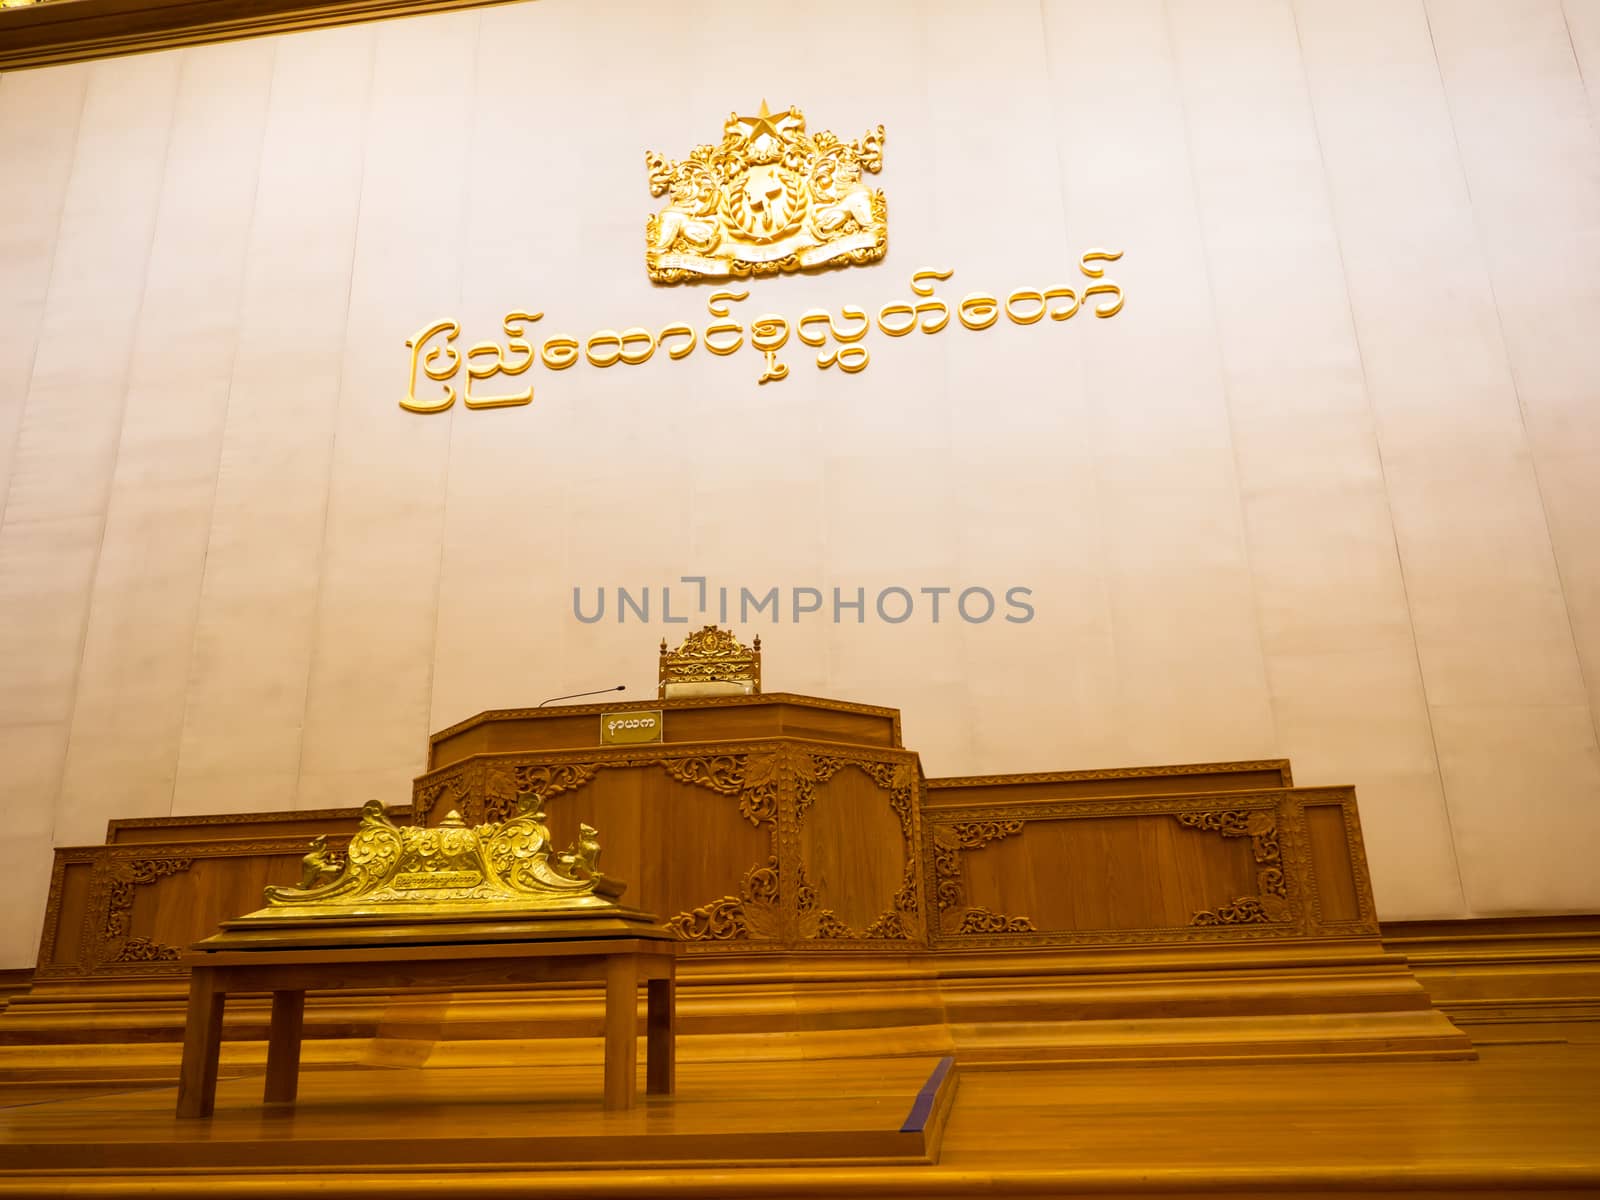 The speaker's seat at the lower assembly, Pyithu Hluttaw, of the Assembly of the Union, Pyidaungsu Hluttaw, in Nay Pyi Taw, the capital of the Republic of the Union of Myanmar.